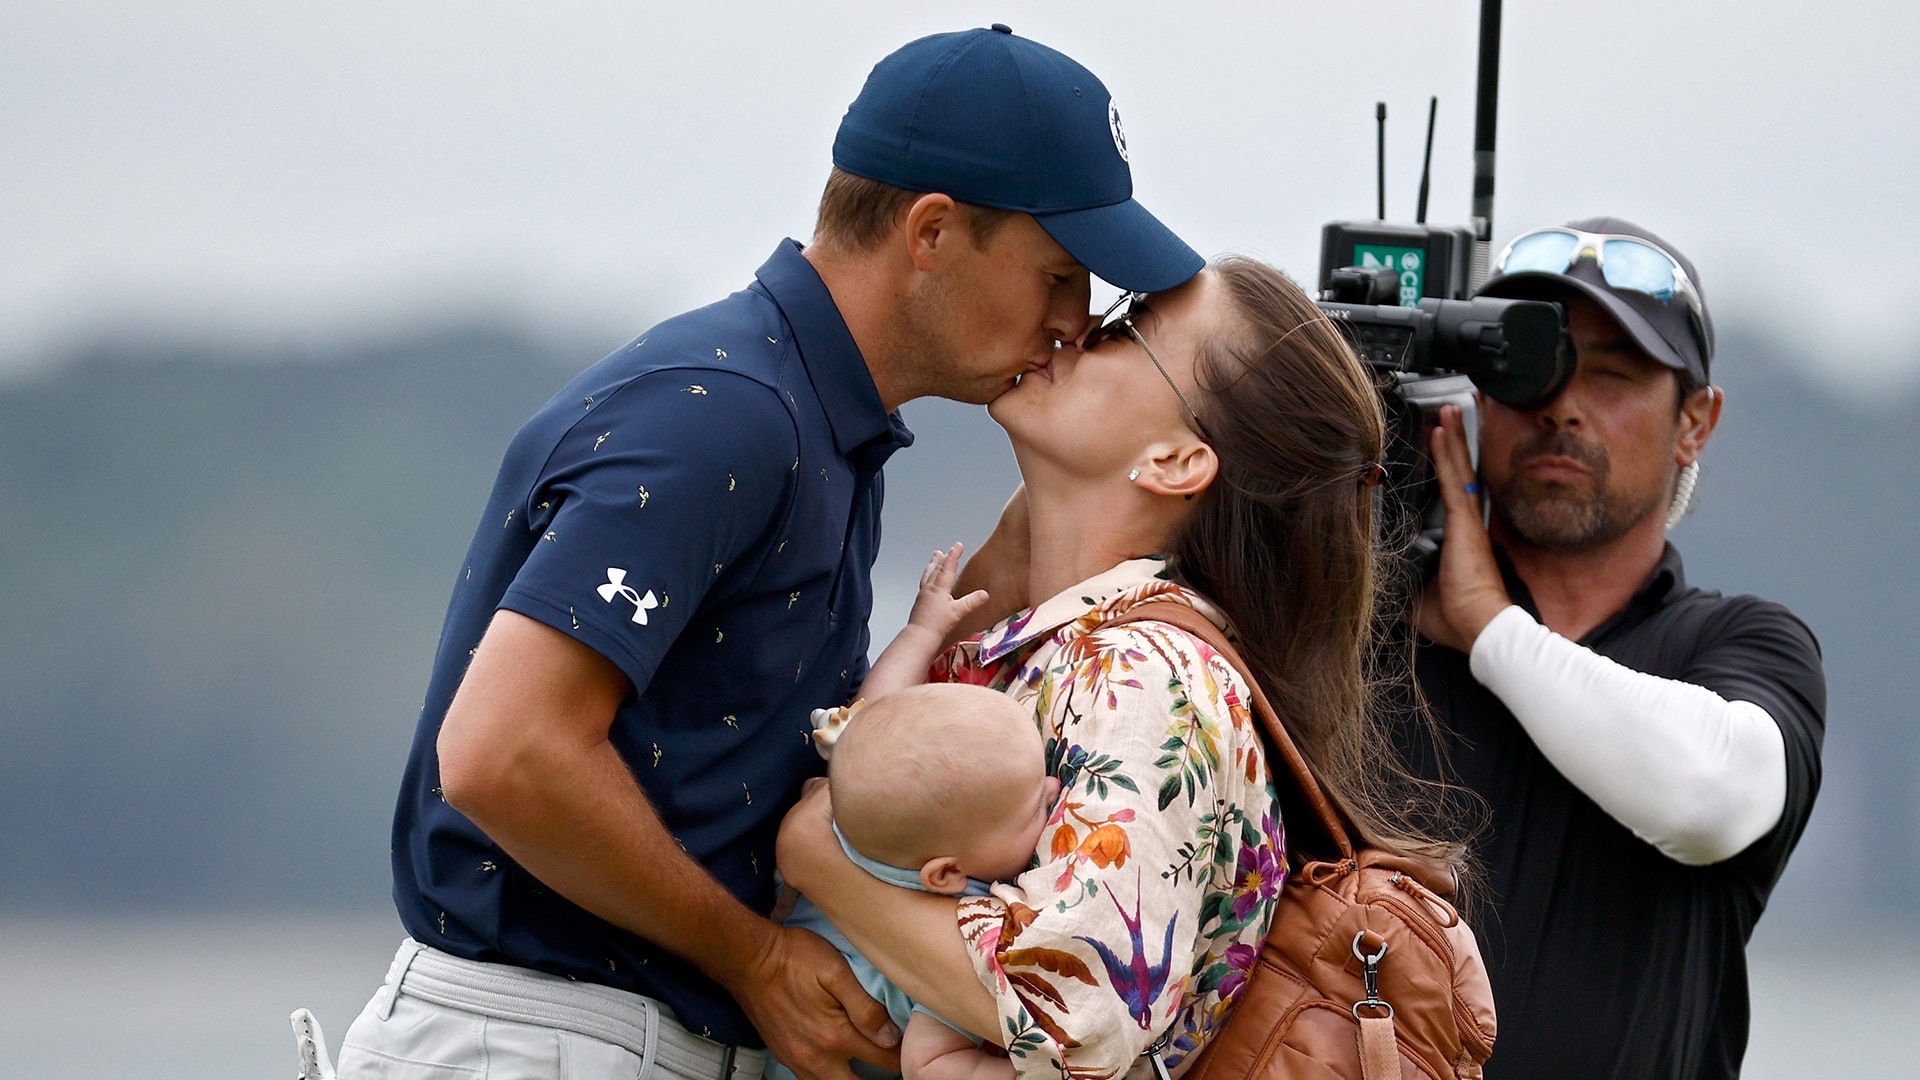 ‘Take 5 seconds’: How Jordan Spieth’s wife played role in RBC Heritage win